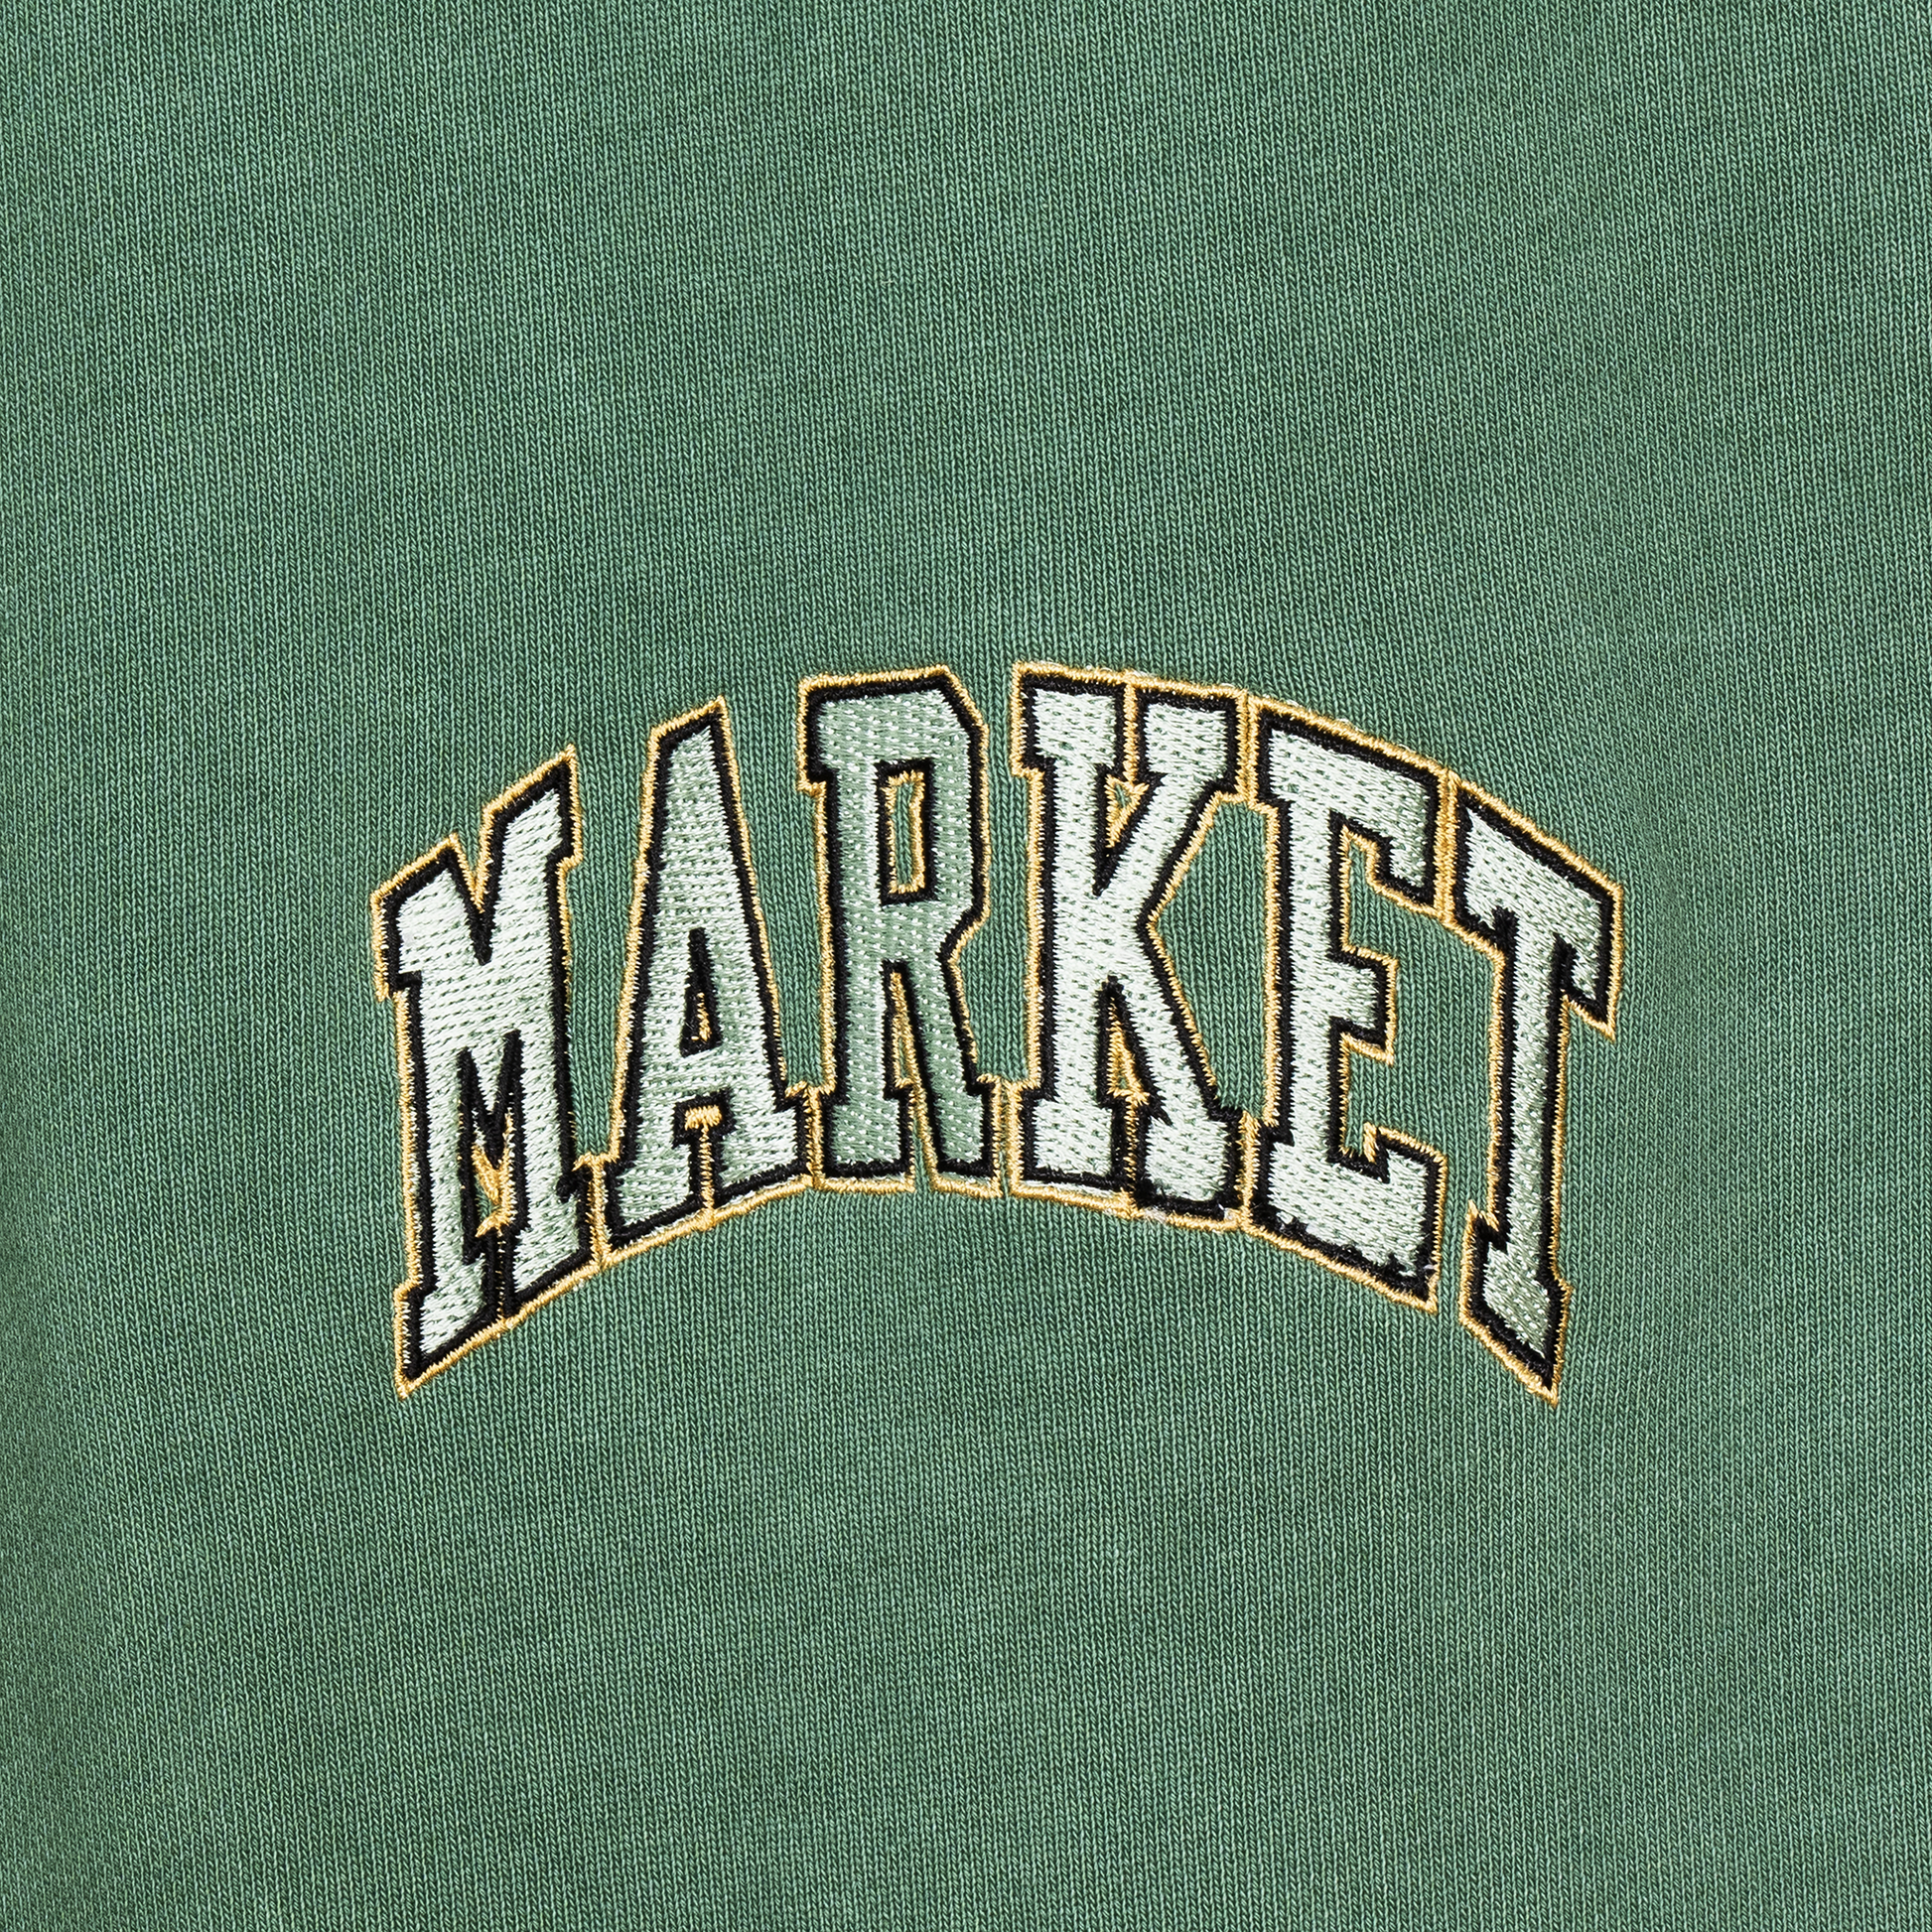 MARKET clothing brand TRIPLE STITCH SWEATPANTS. Find more graphic tees, sweatpants, shorts and more bottoms at MarketStudios.com. Formally Chinatown Market. 